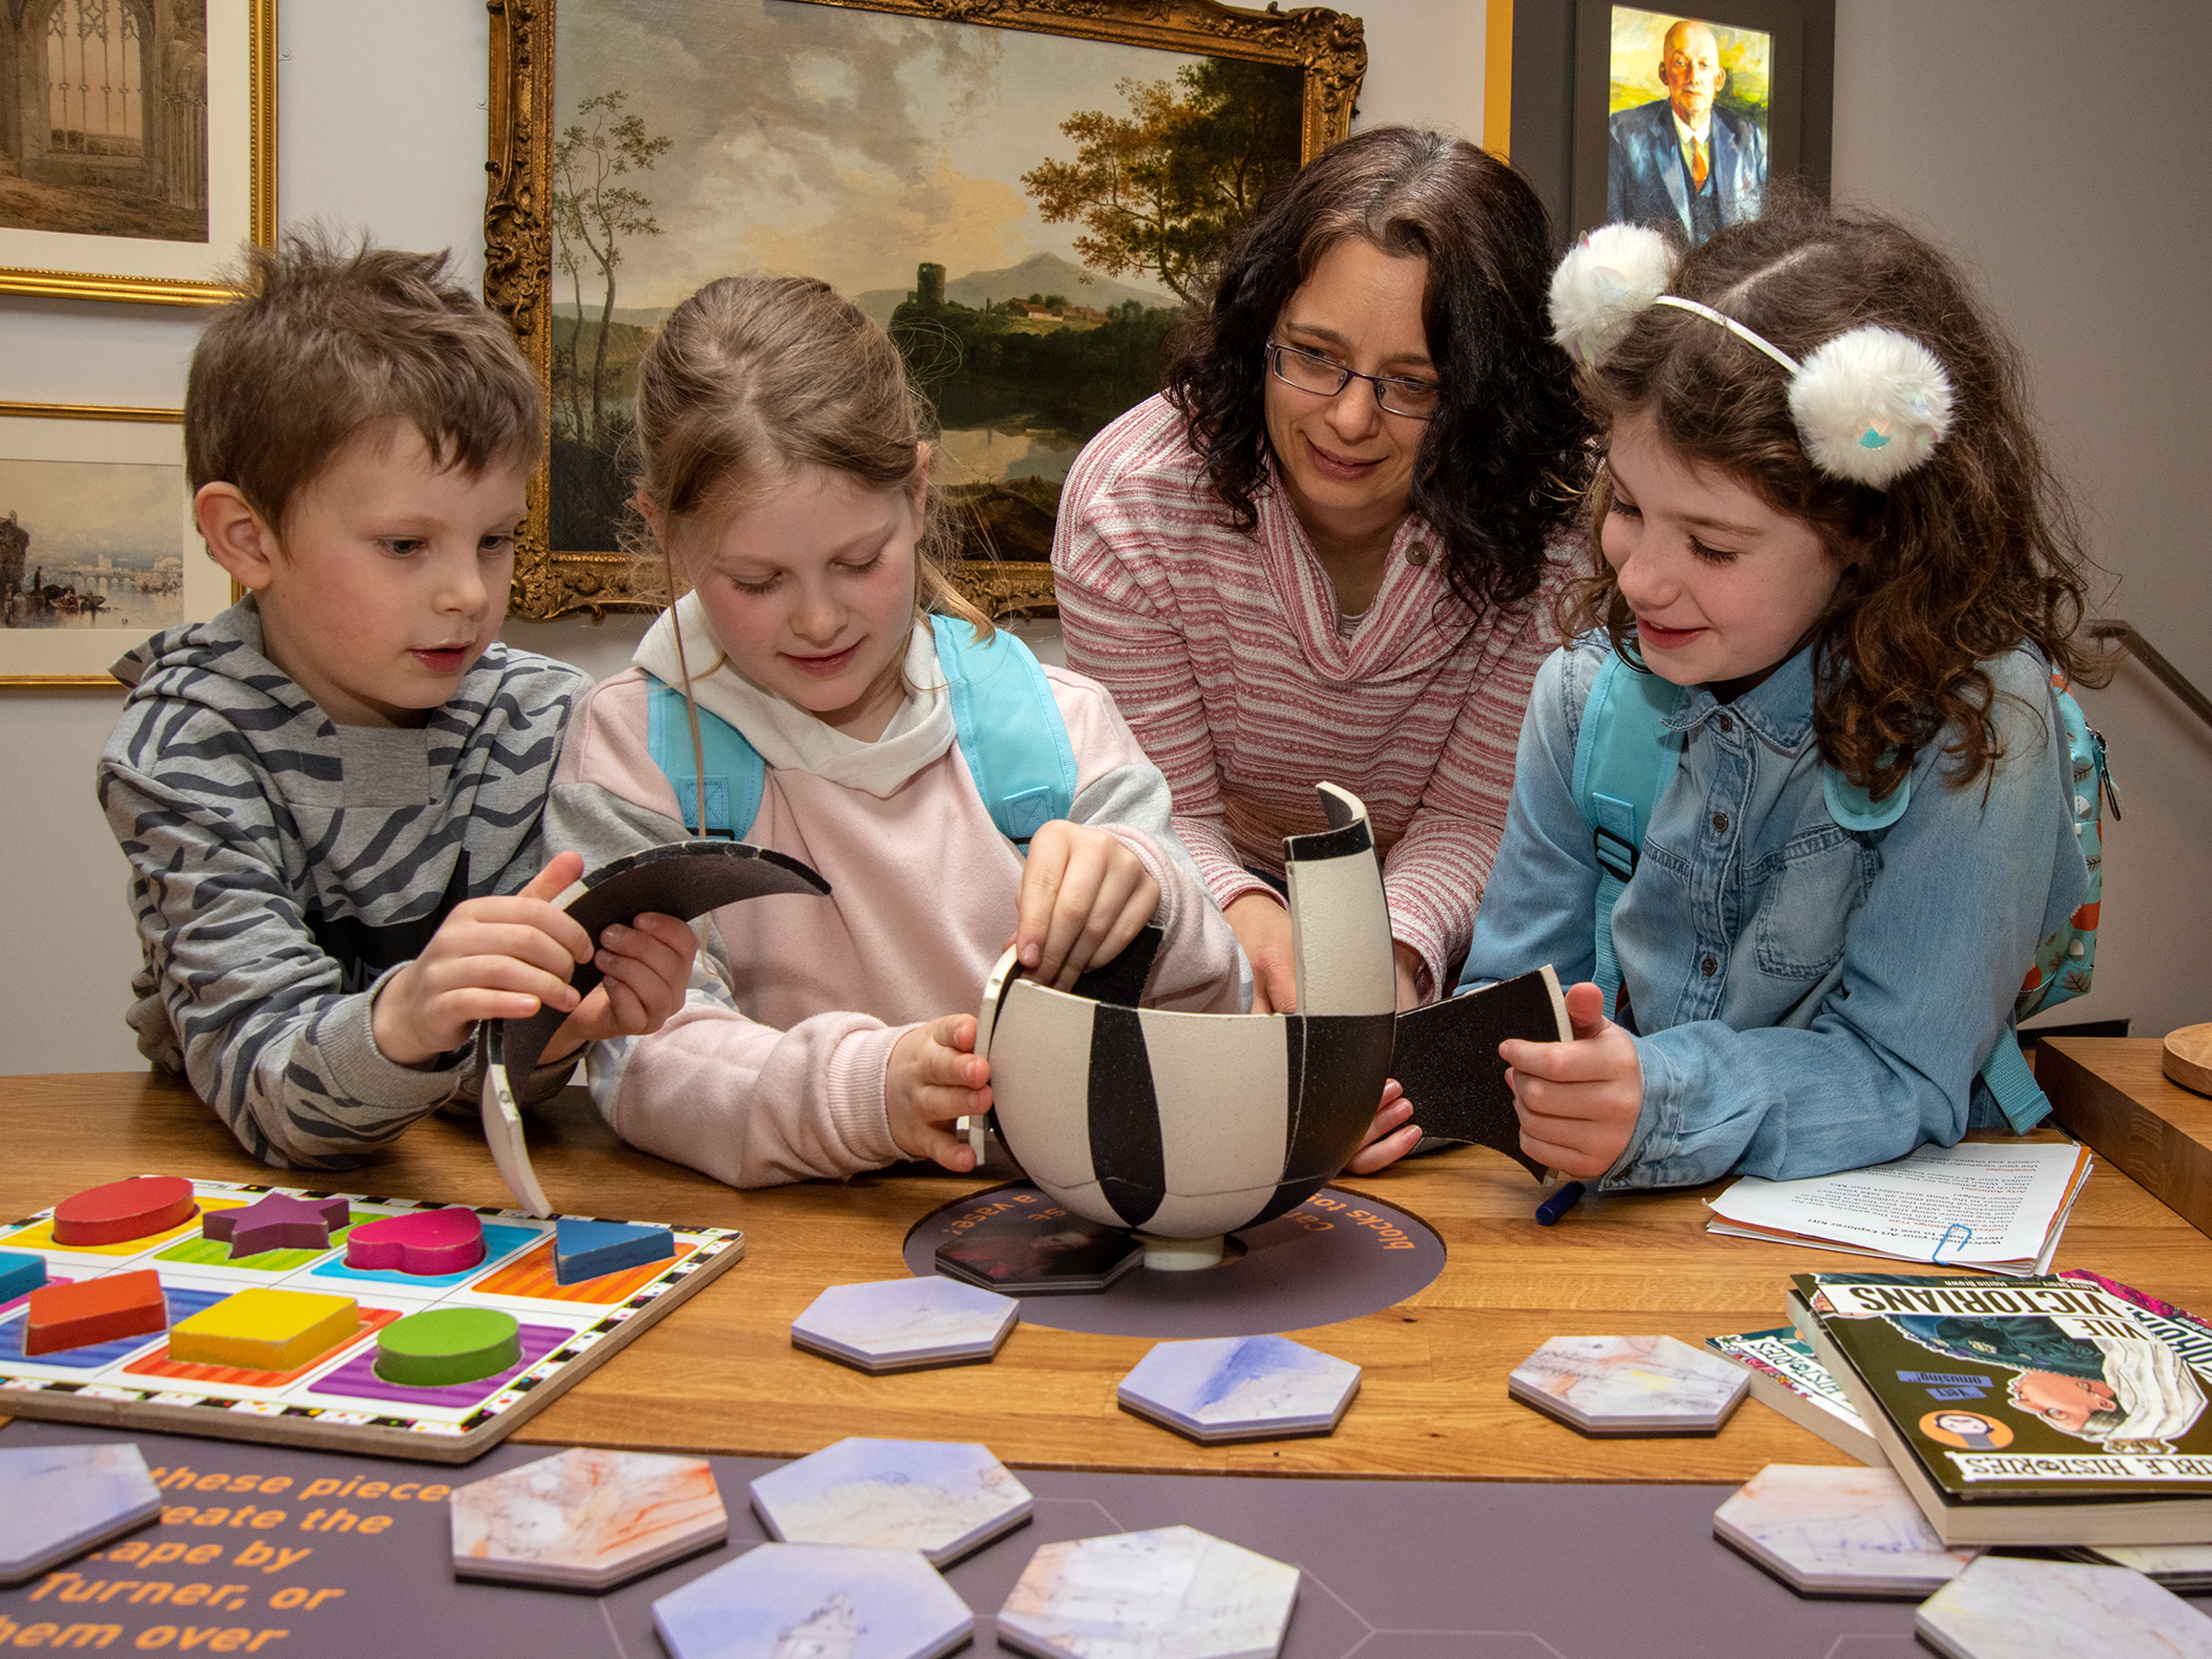 Three children and an adult gather around a table to put together a craft activity in a gallery.